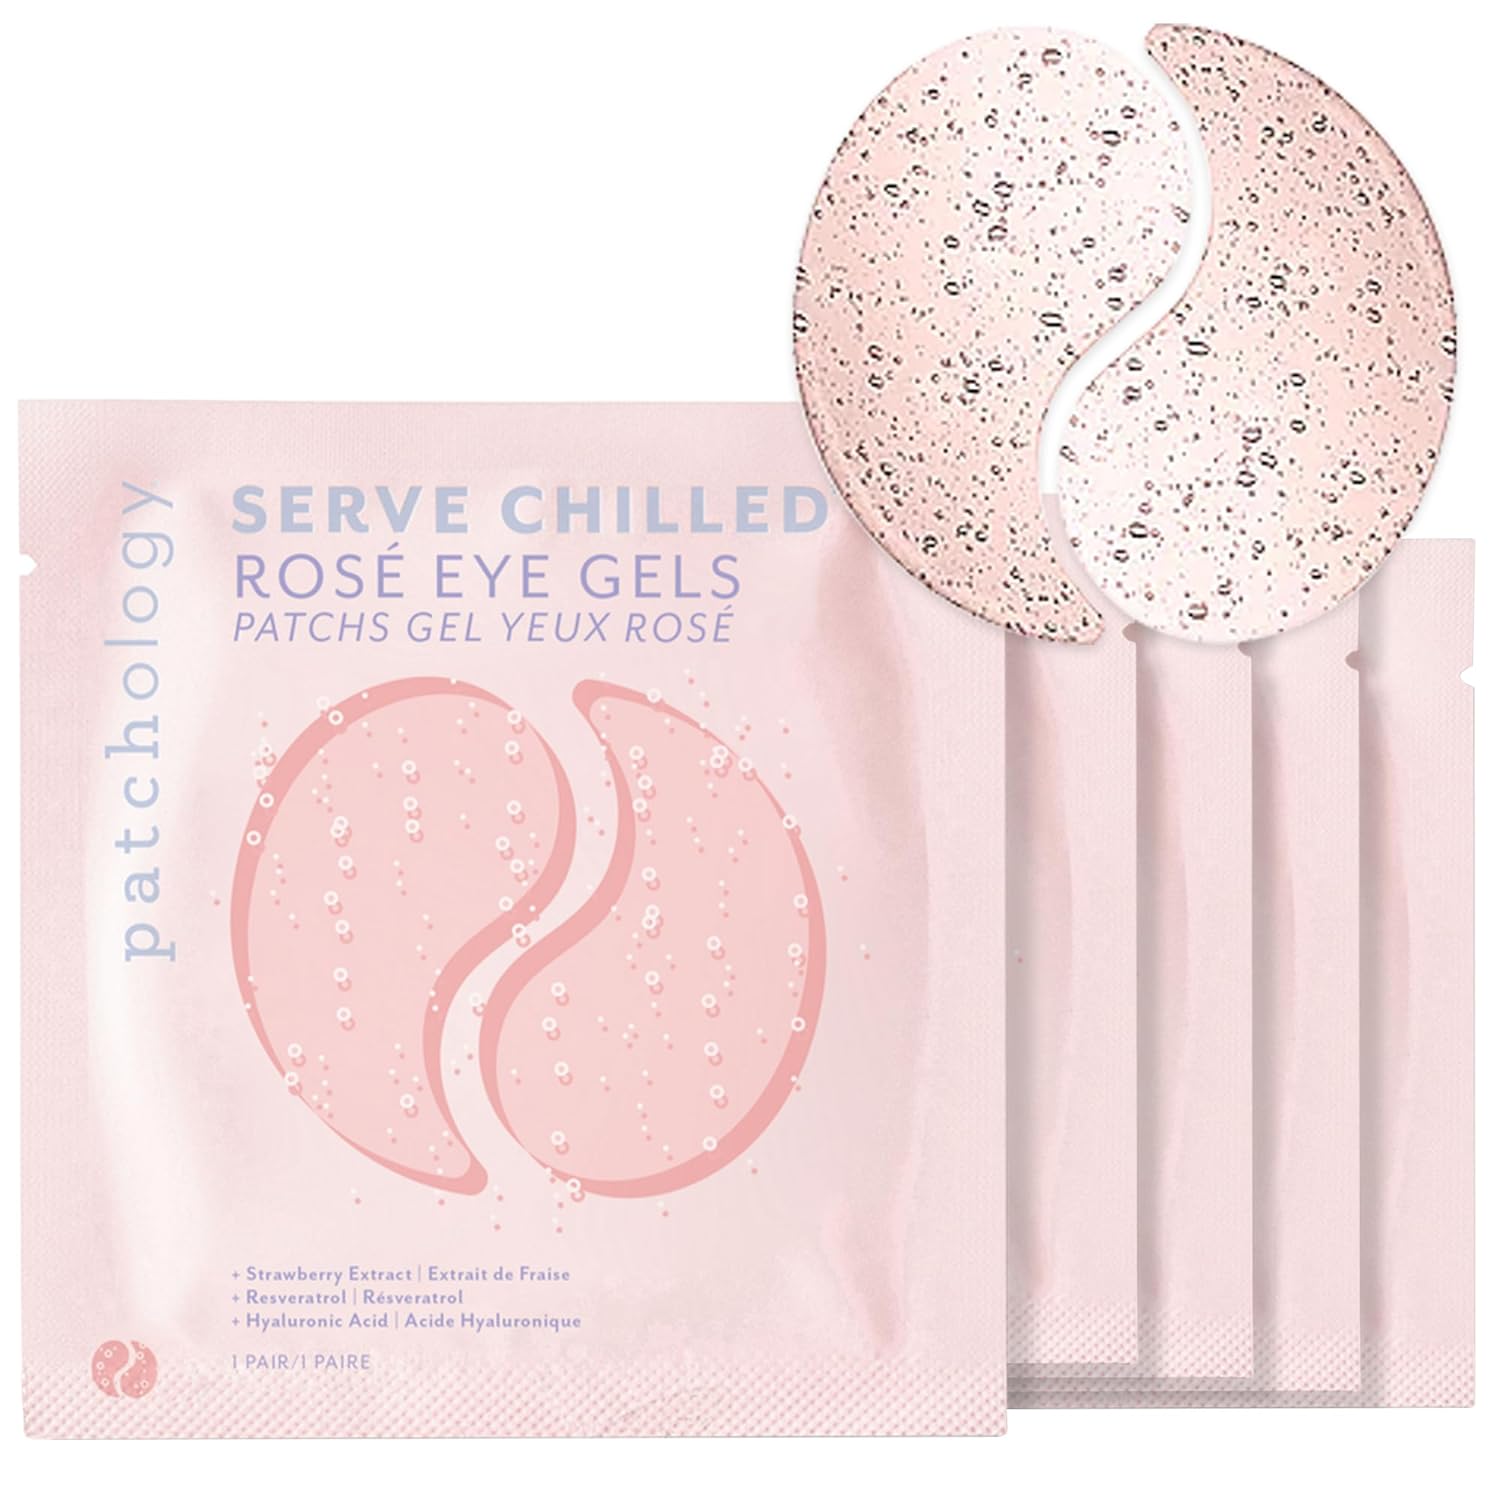 Patchology Serve Chilled Rosé Hydrating Eye Patches Review